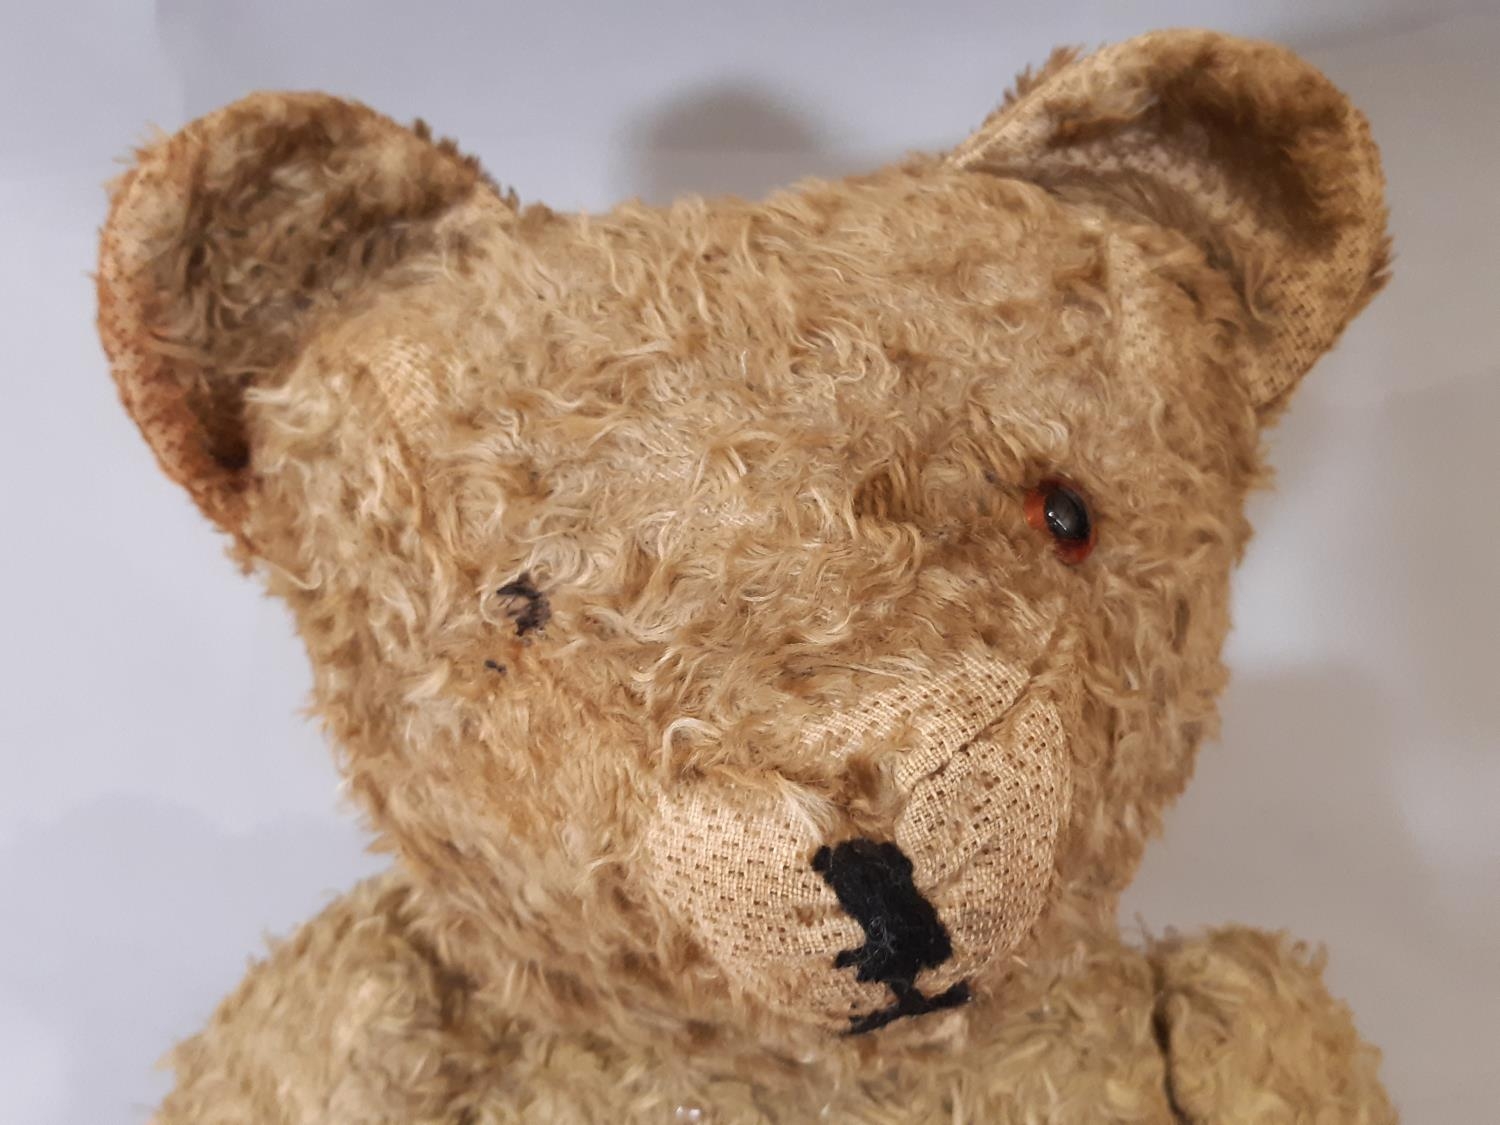 4 vintage teddy bears, all play worn including a tall firmly stuffed bear with stitched nose and - Image 5 of 5